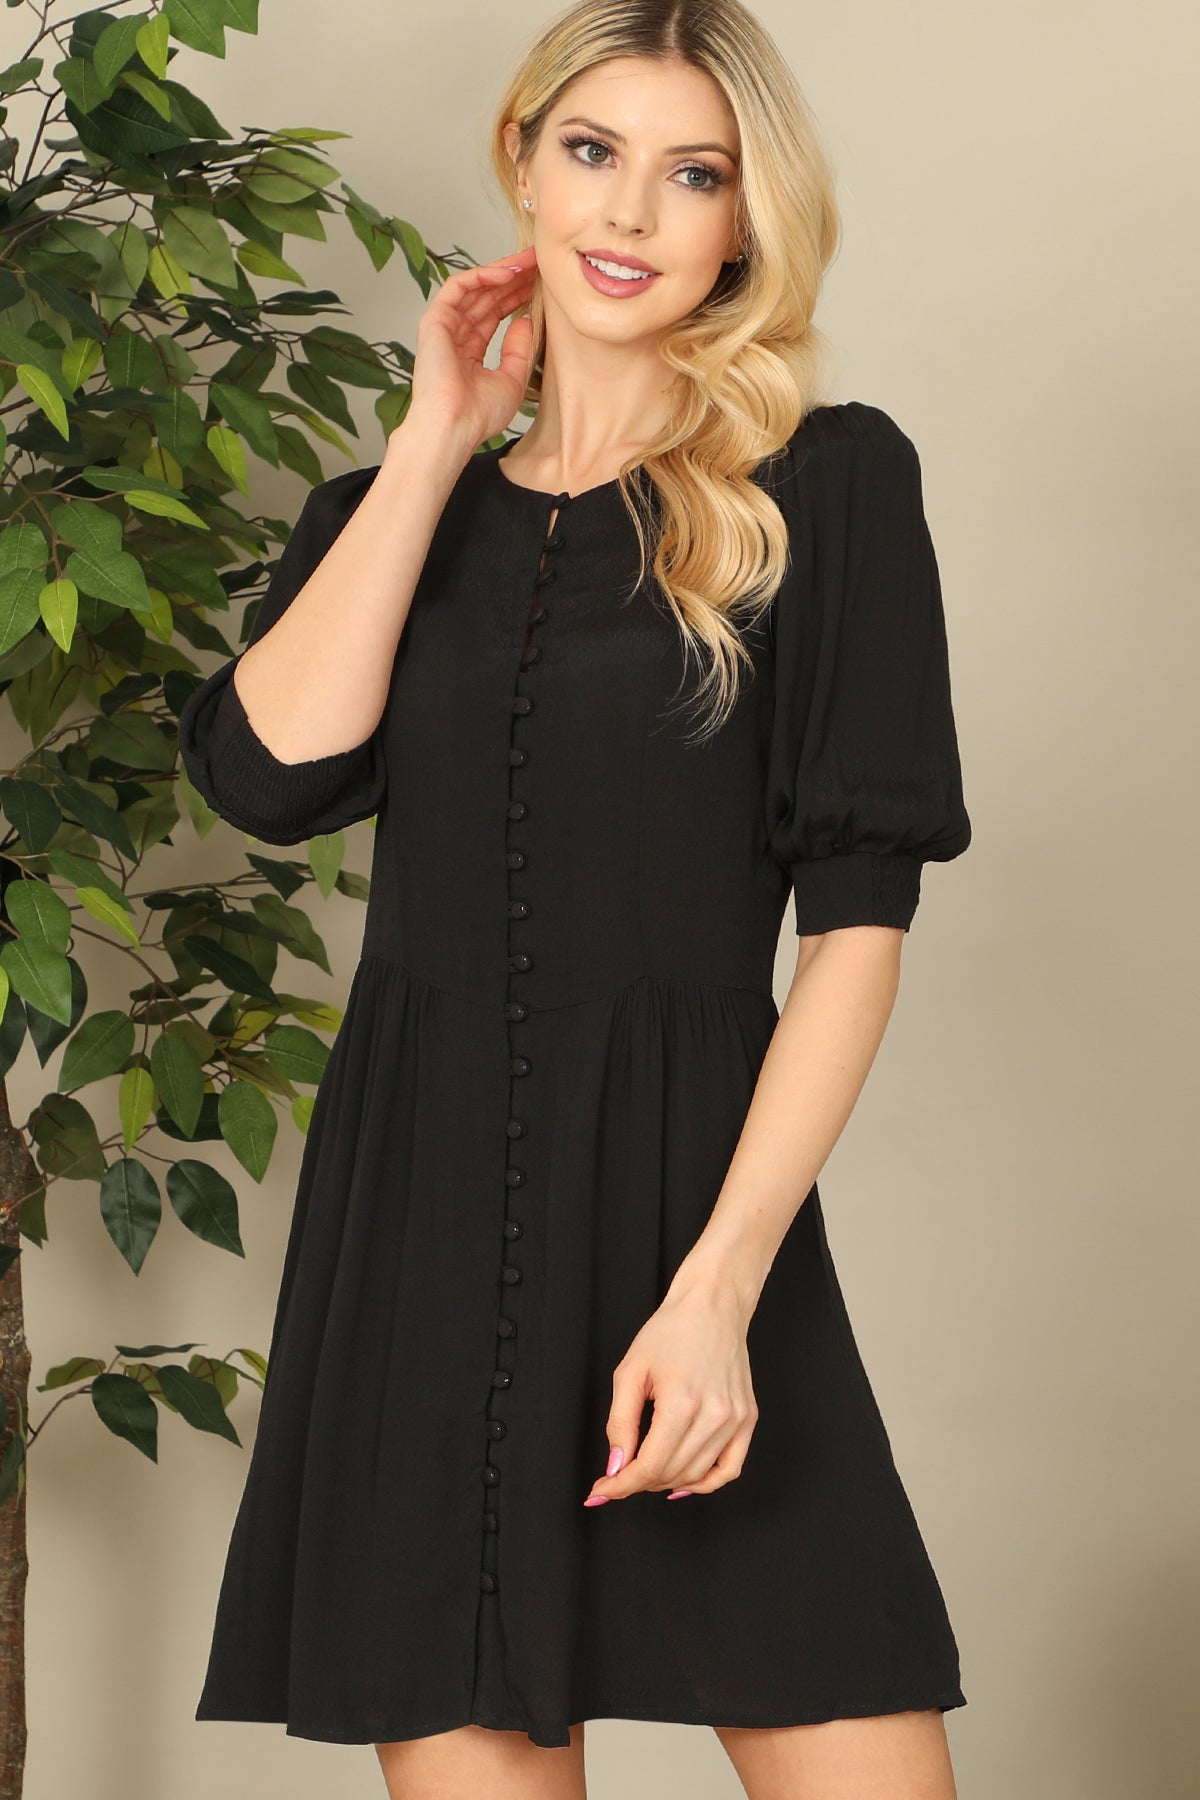 HALF PUFF SLEEVE BUTTON-DOWN SOLID DRESS 2-2-1